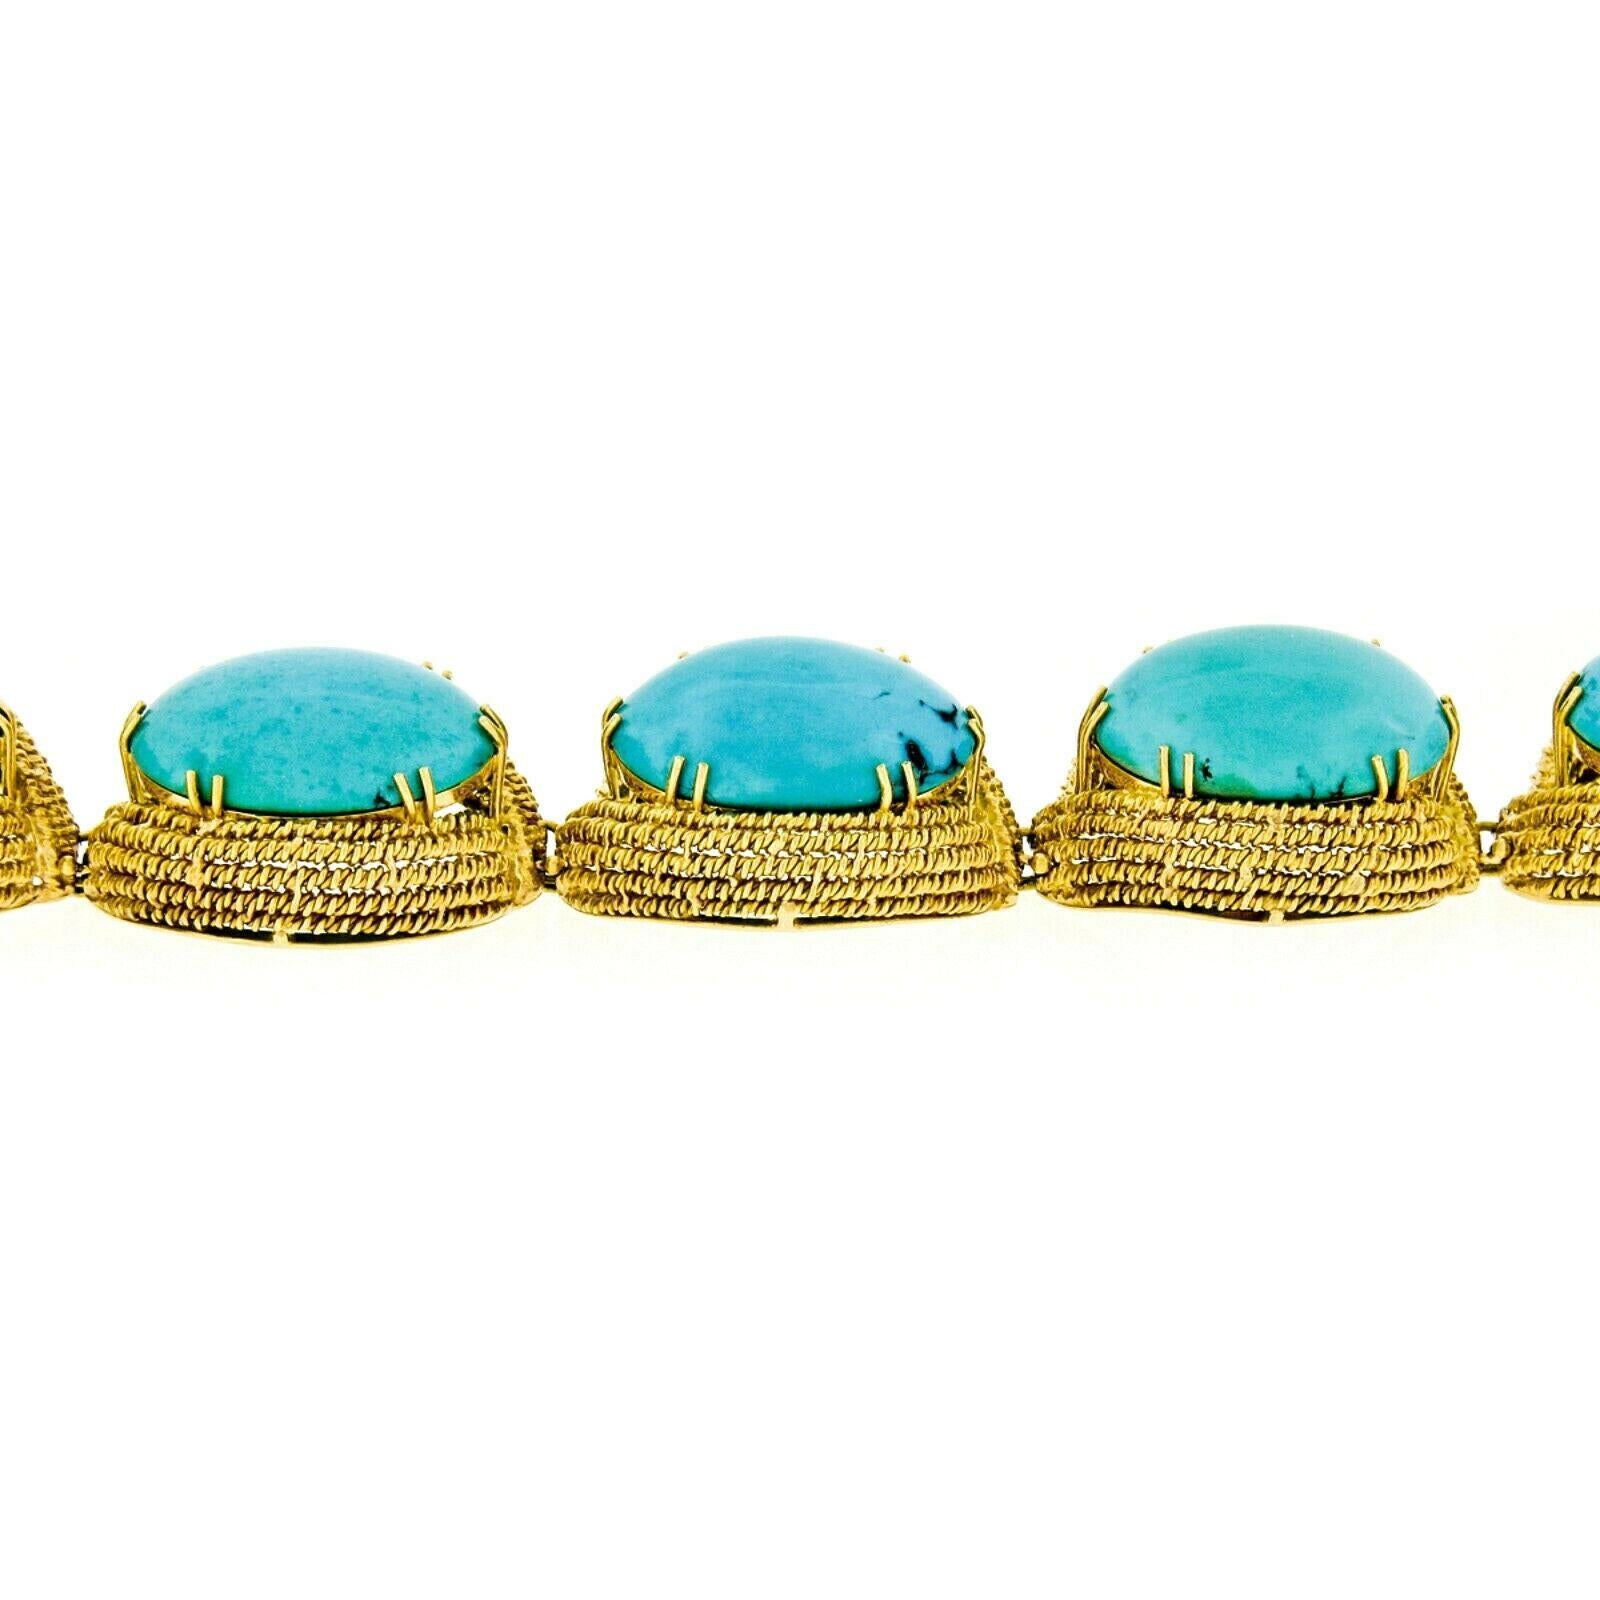 Women's Vintage Handmade 18k Gold GIA Large 200ctw Cabochon Turquoise Statement Necklace